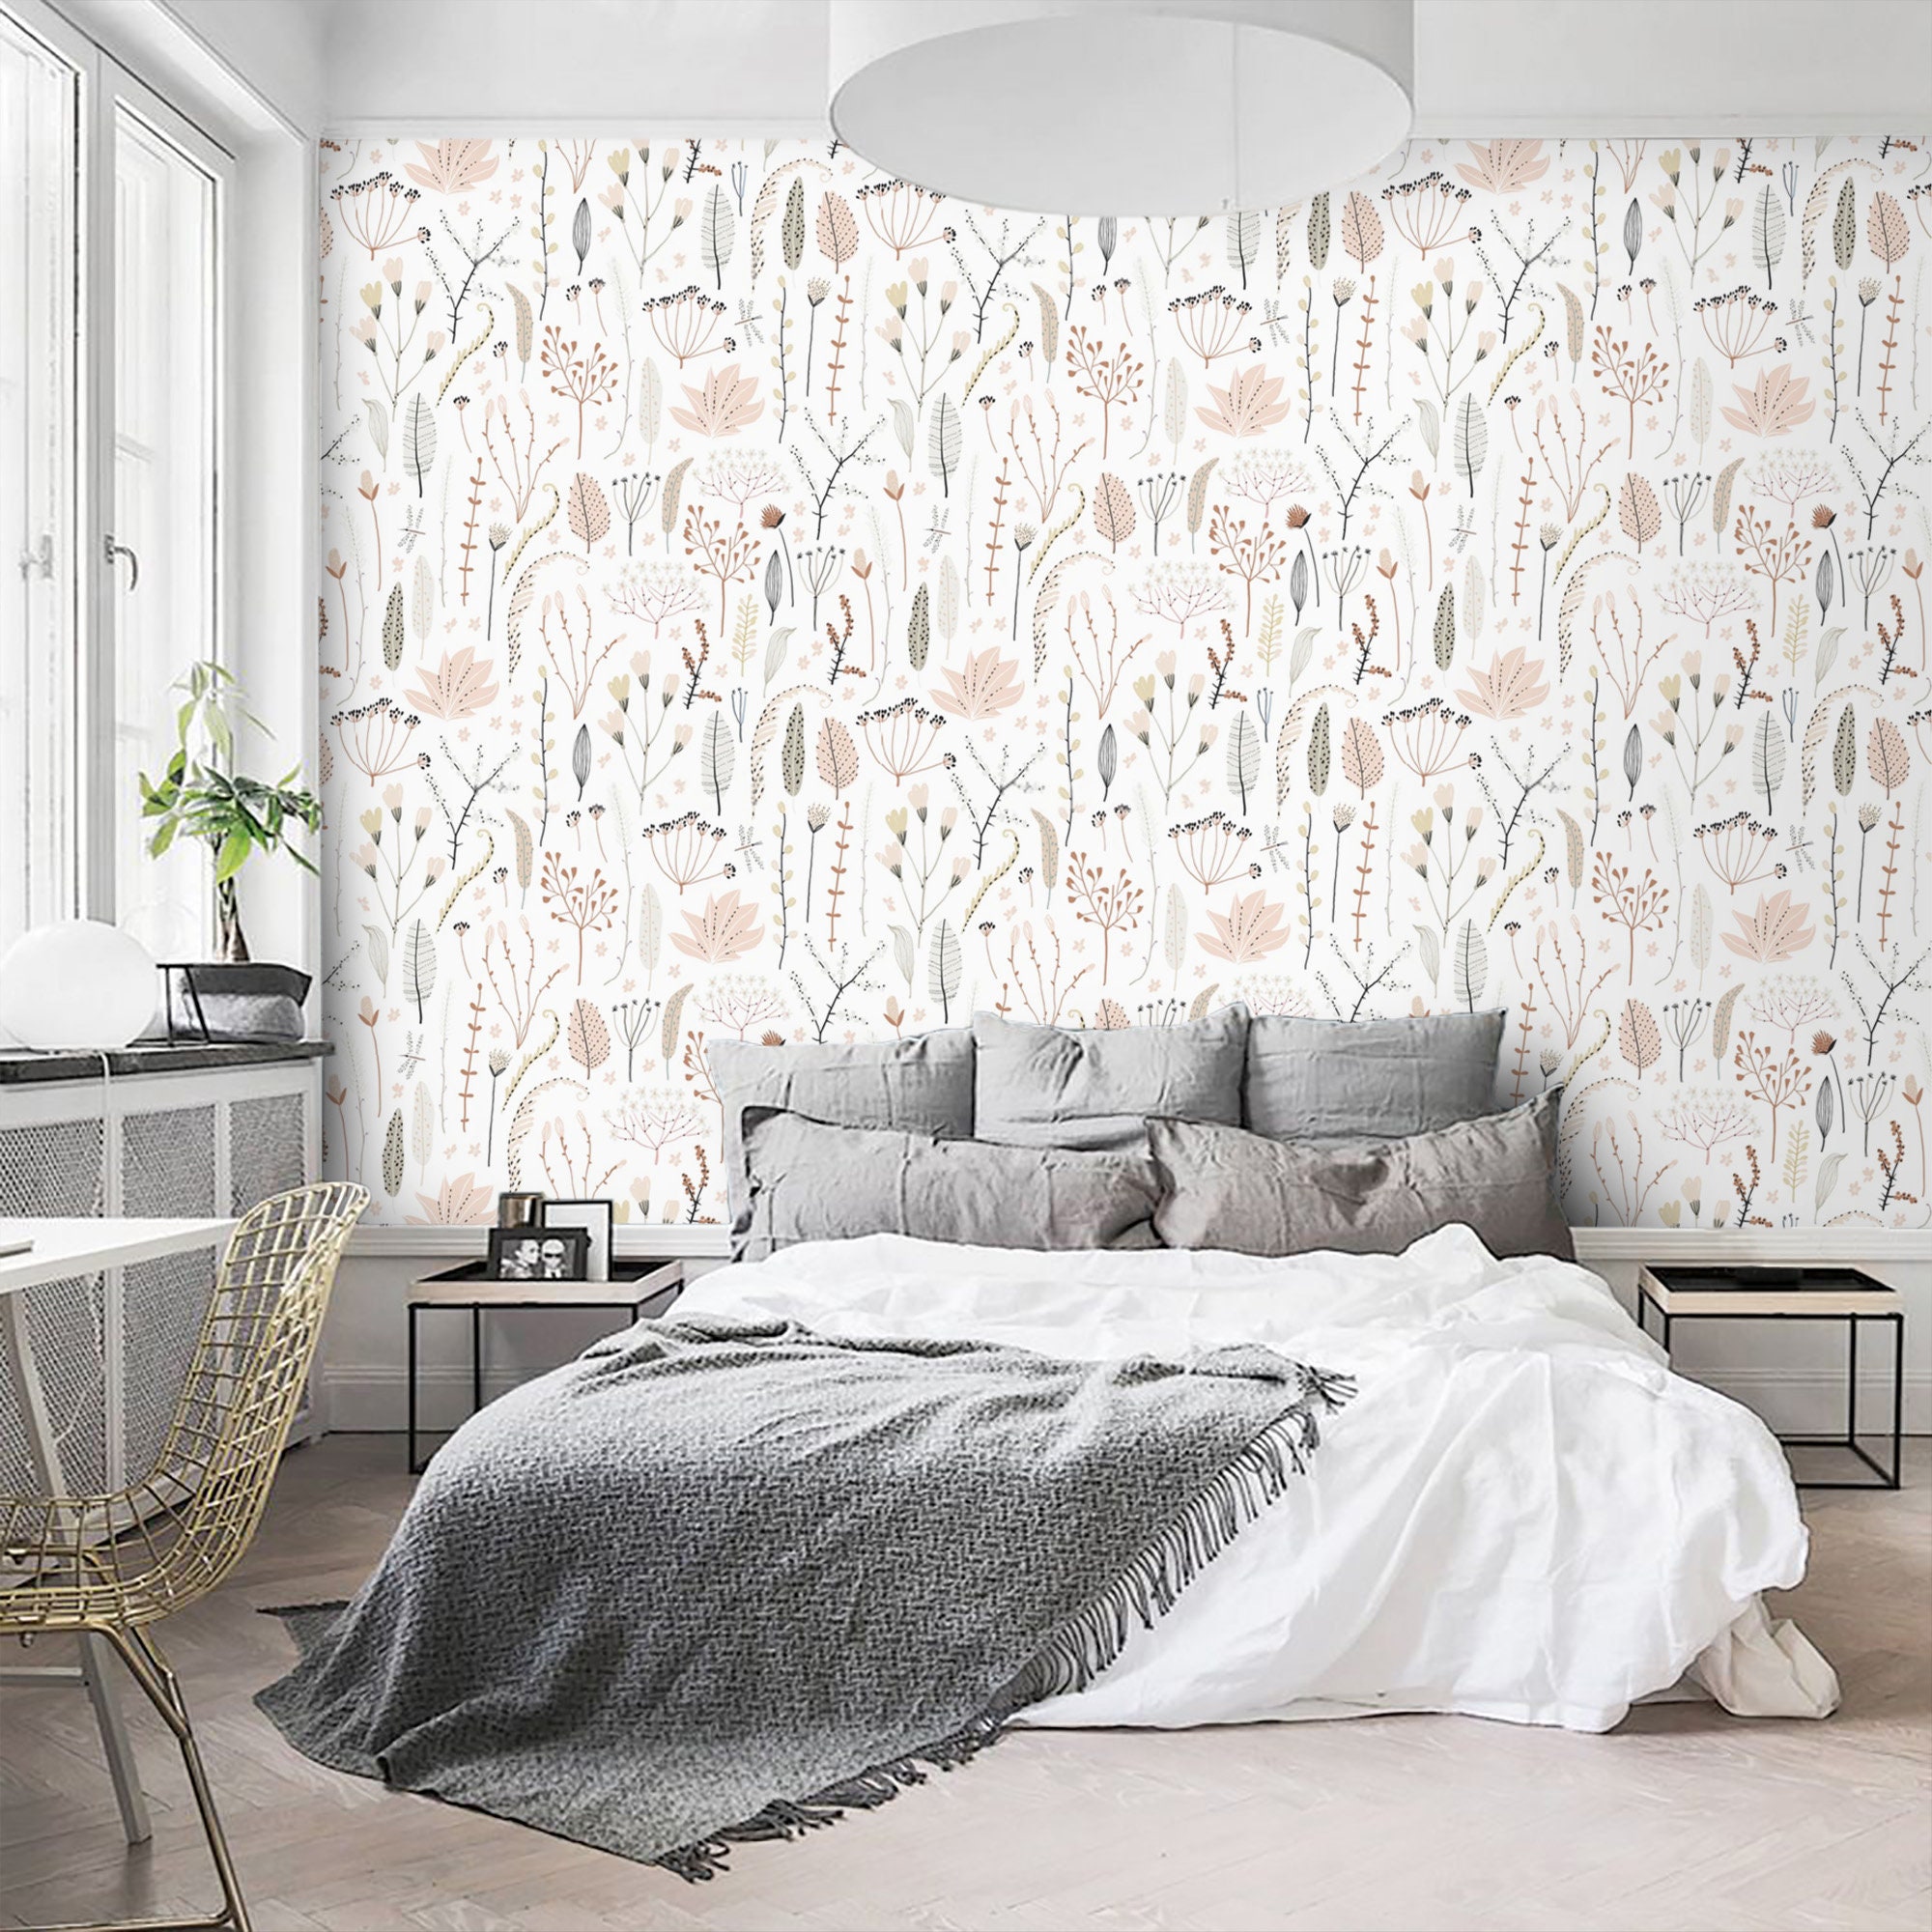  3D Conspicuous Flower 2548 Wall Paper Print Decal Deco Wall  Mural Self-Adhesive Wallpaper AJ US Lv (Woven Paper (Need Glue), 【 82”x58”】  208x146cm(WxH)) : Tools & Home Improvement